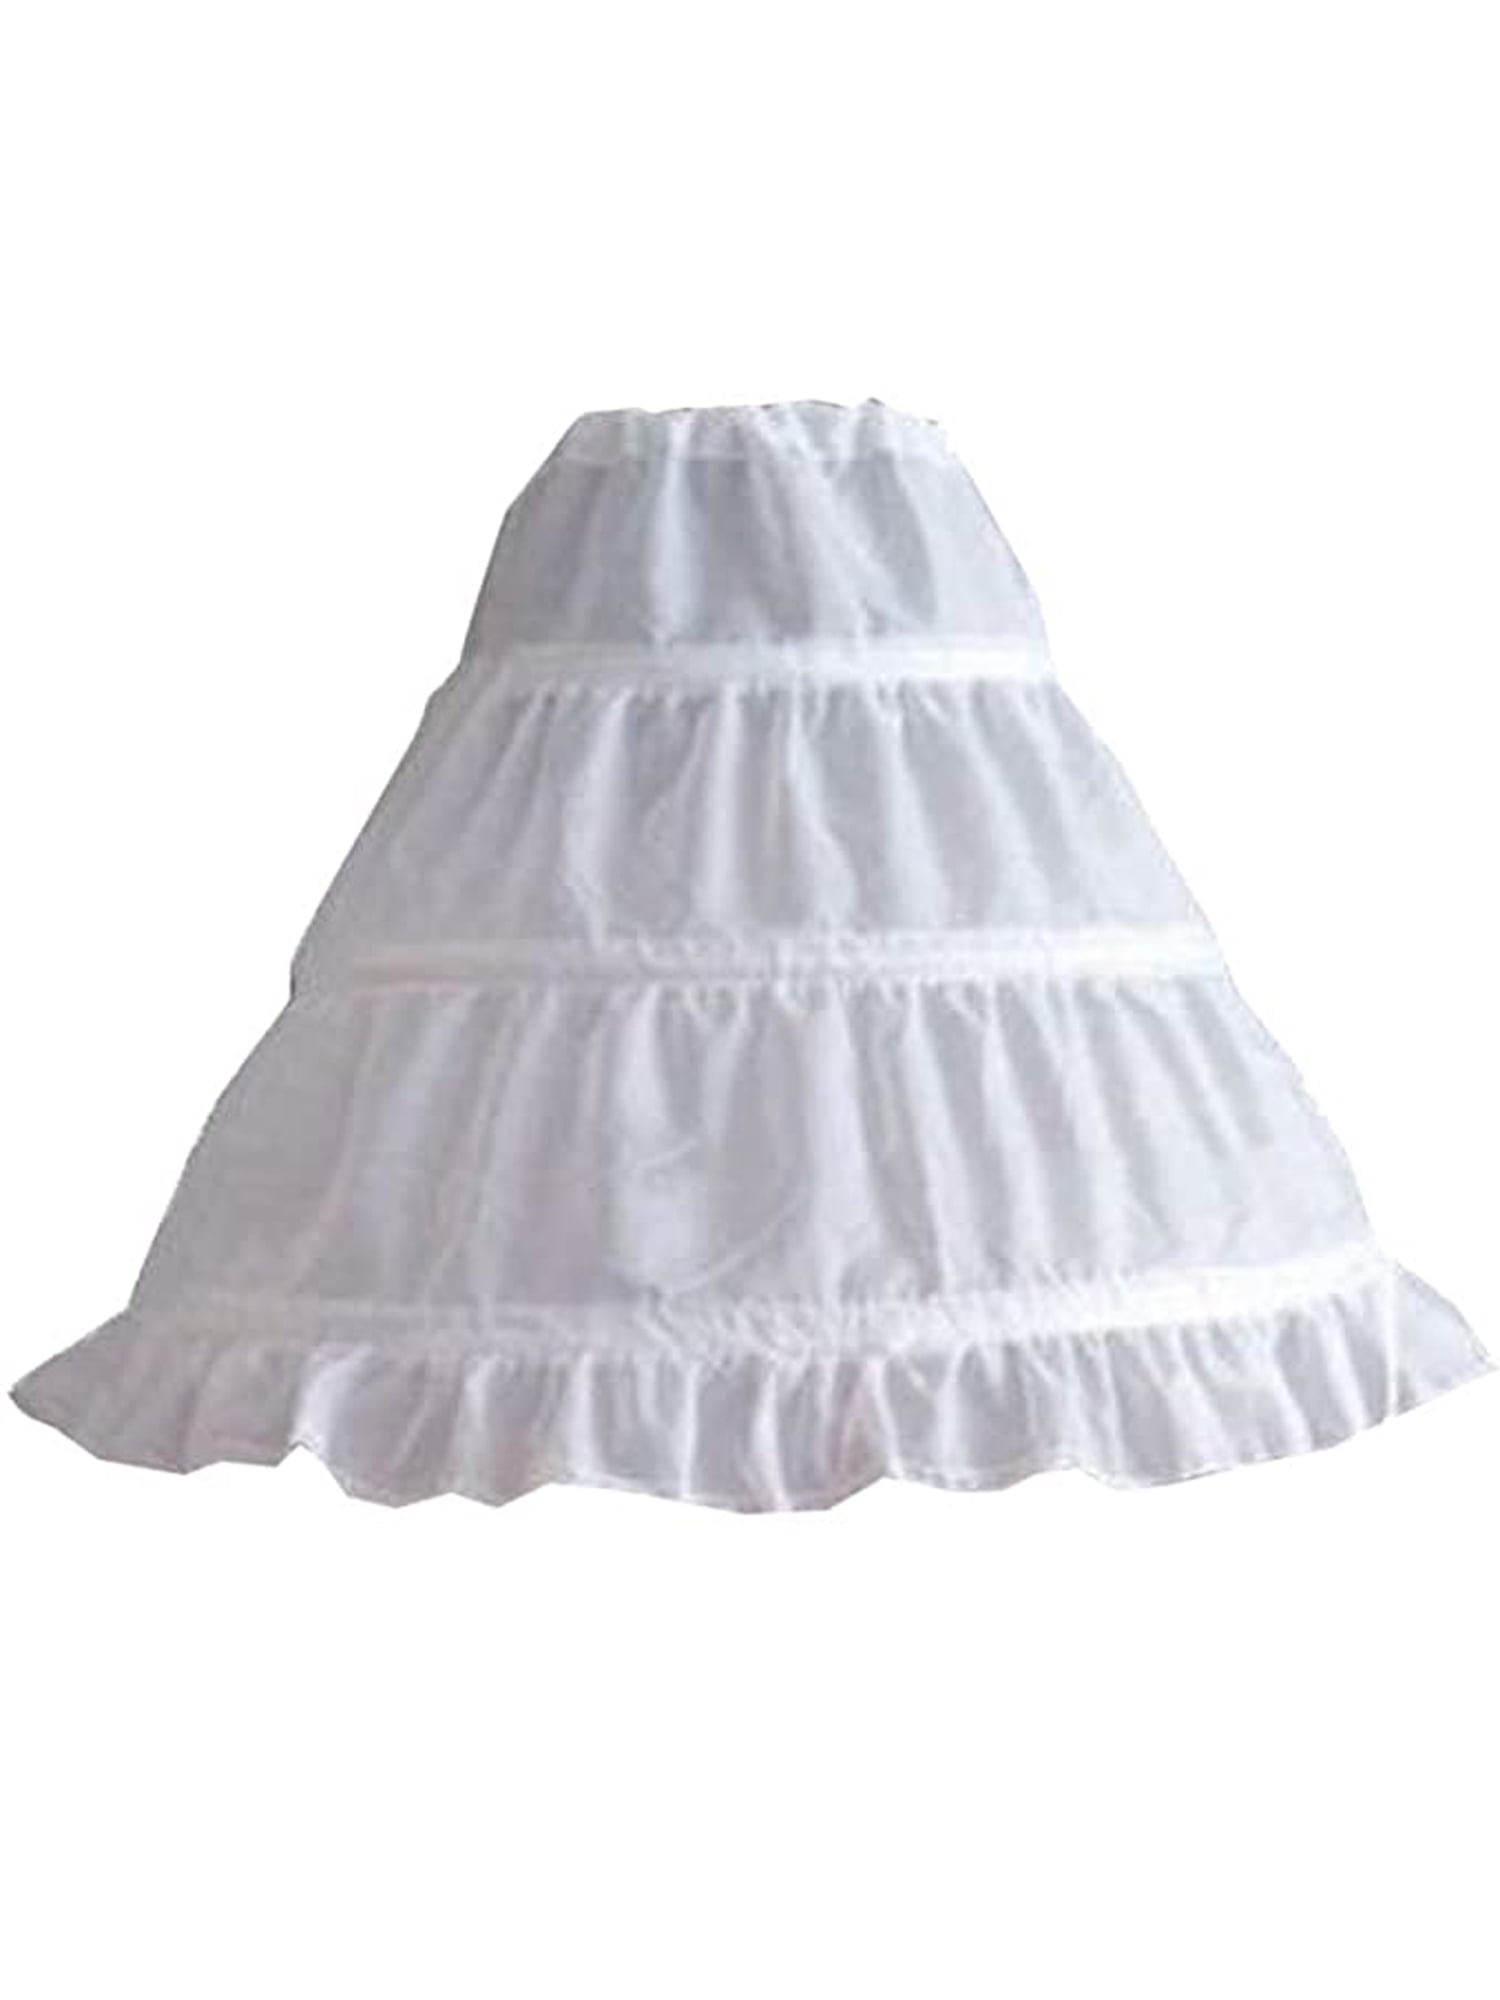 Latest Child Petticoat 3-Hoop Flower Girl Crinoline Party Pageant A-Line Dress 